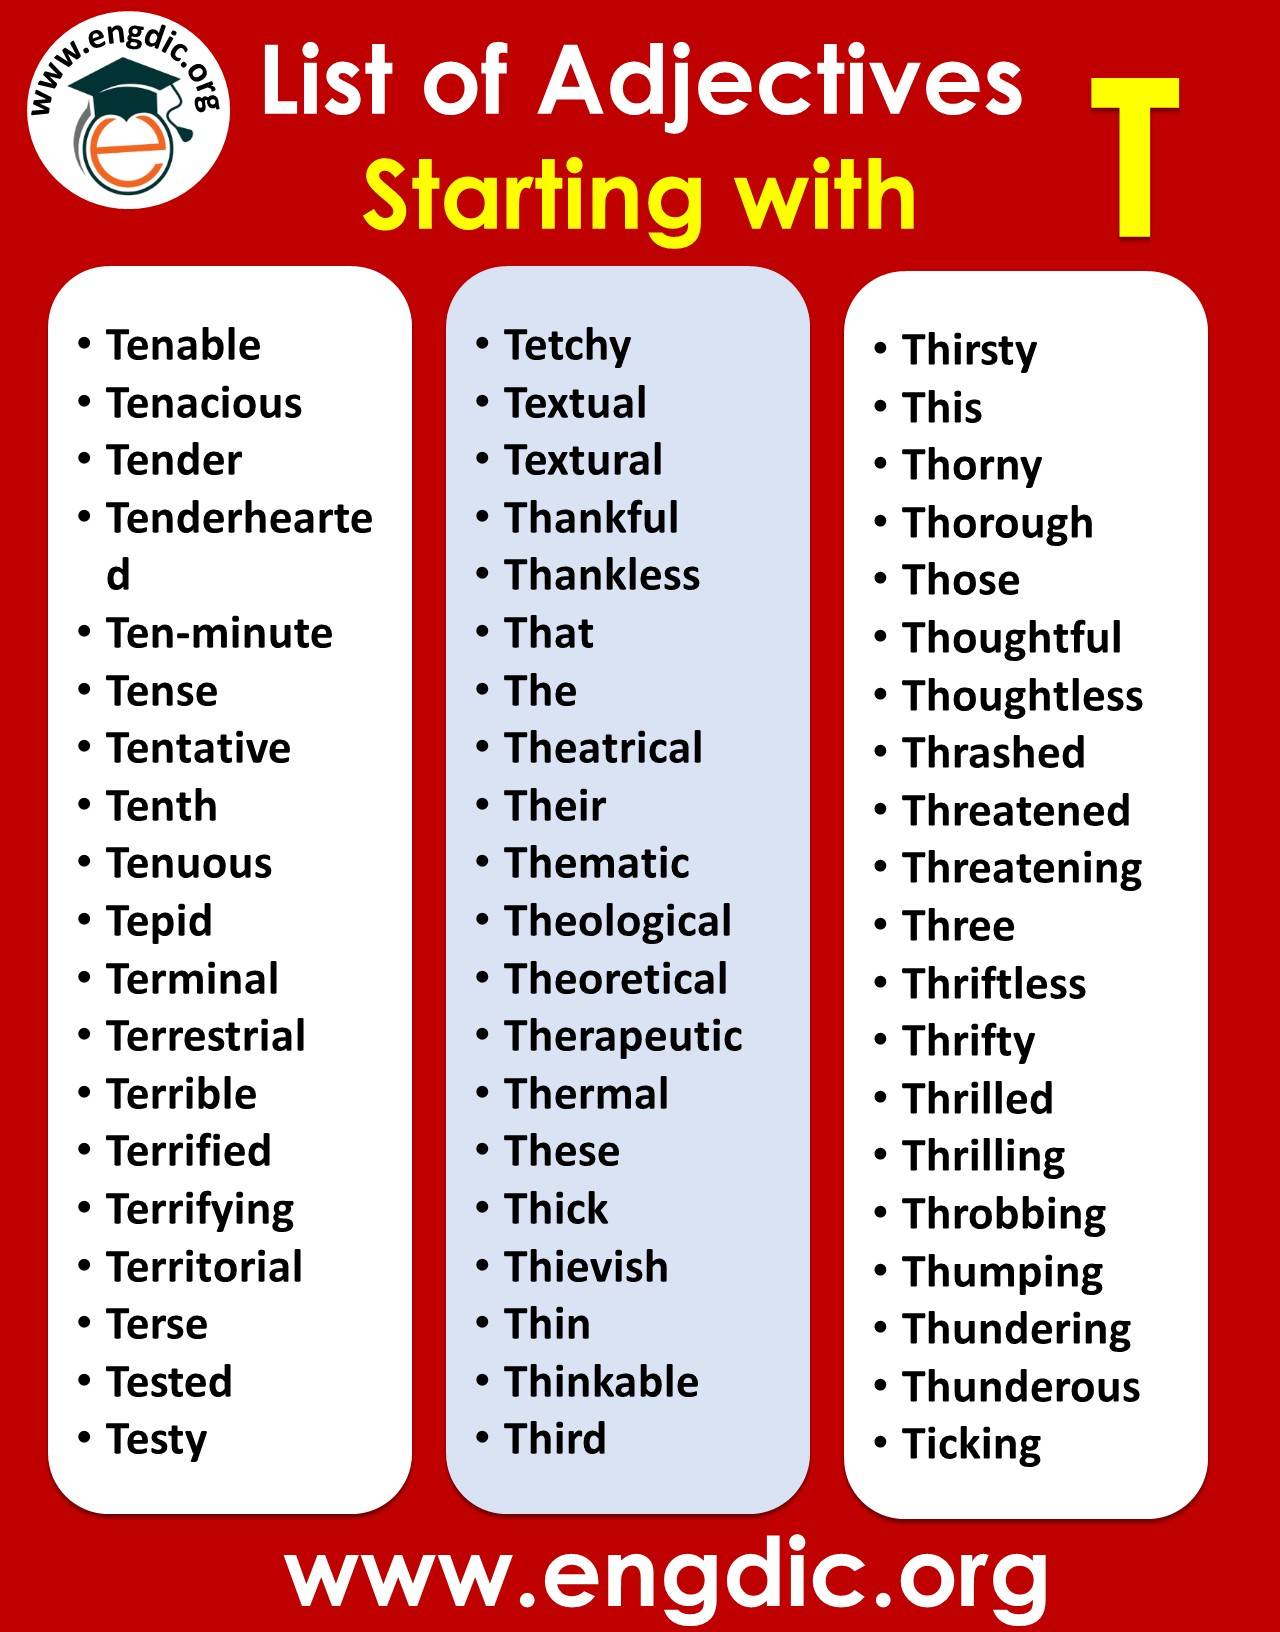 adjectives that start with t to describe a person positively